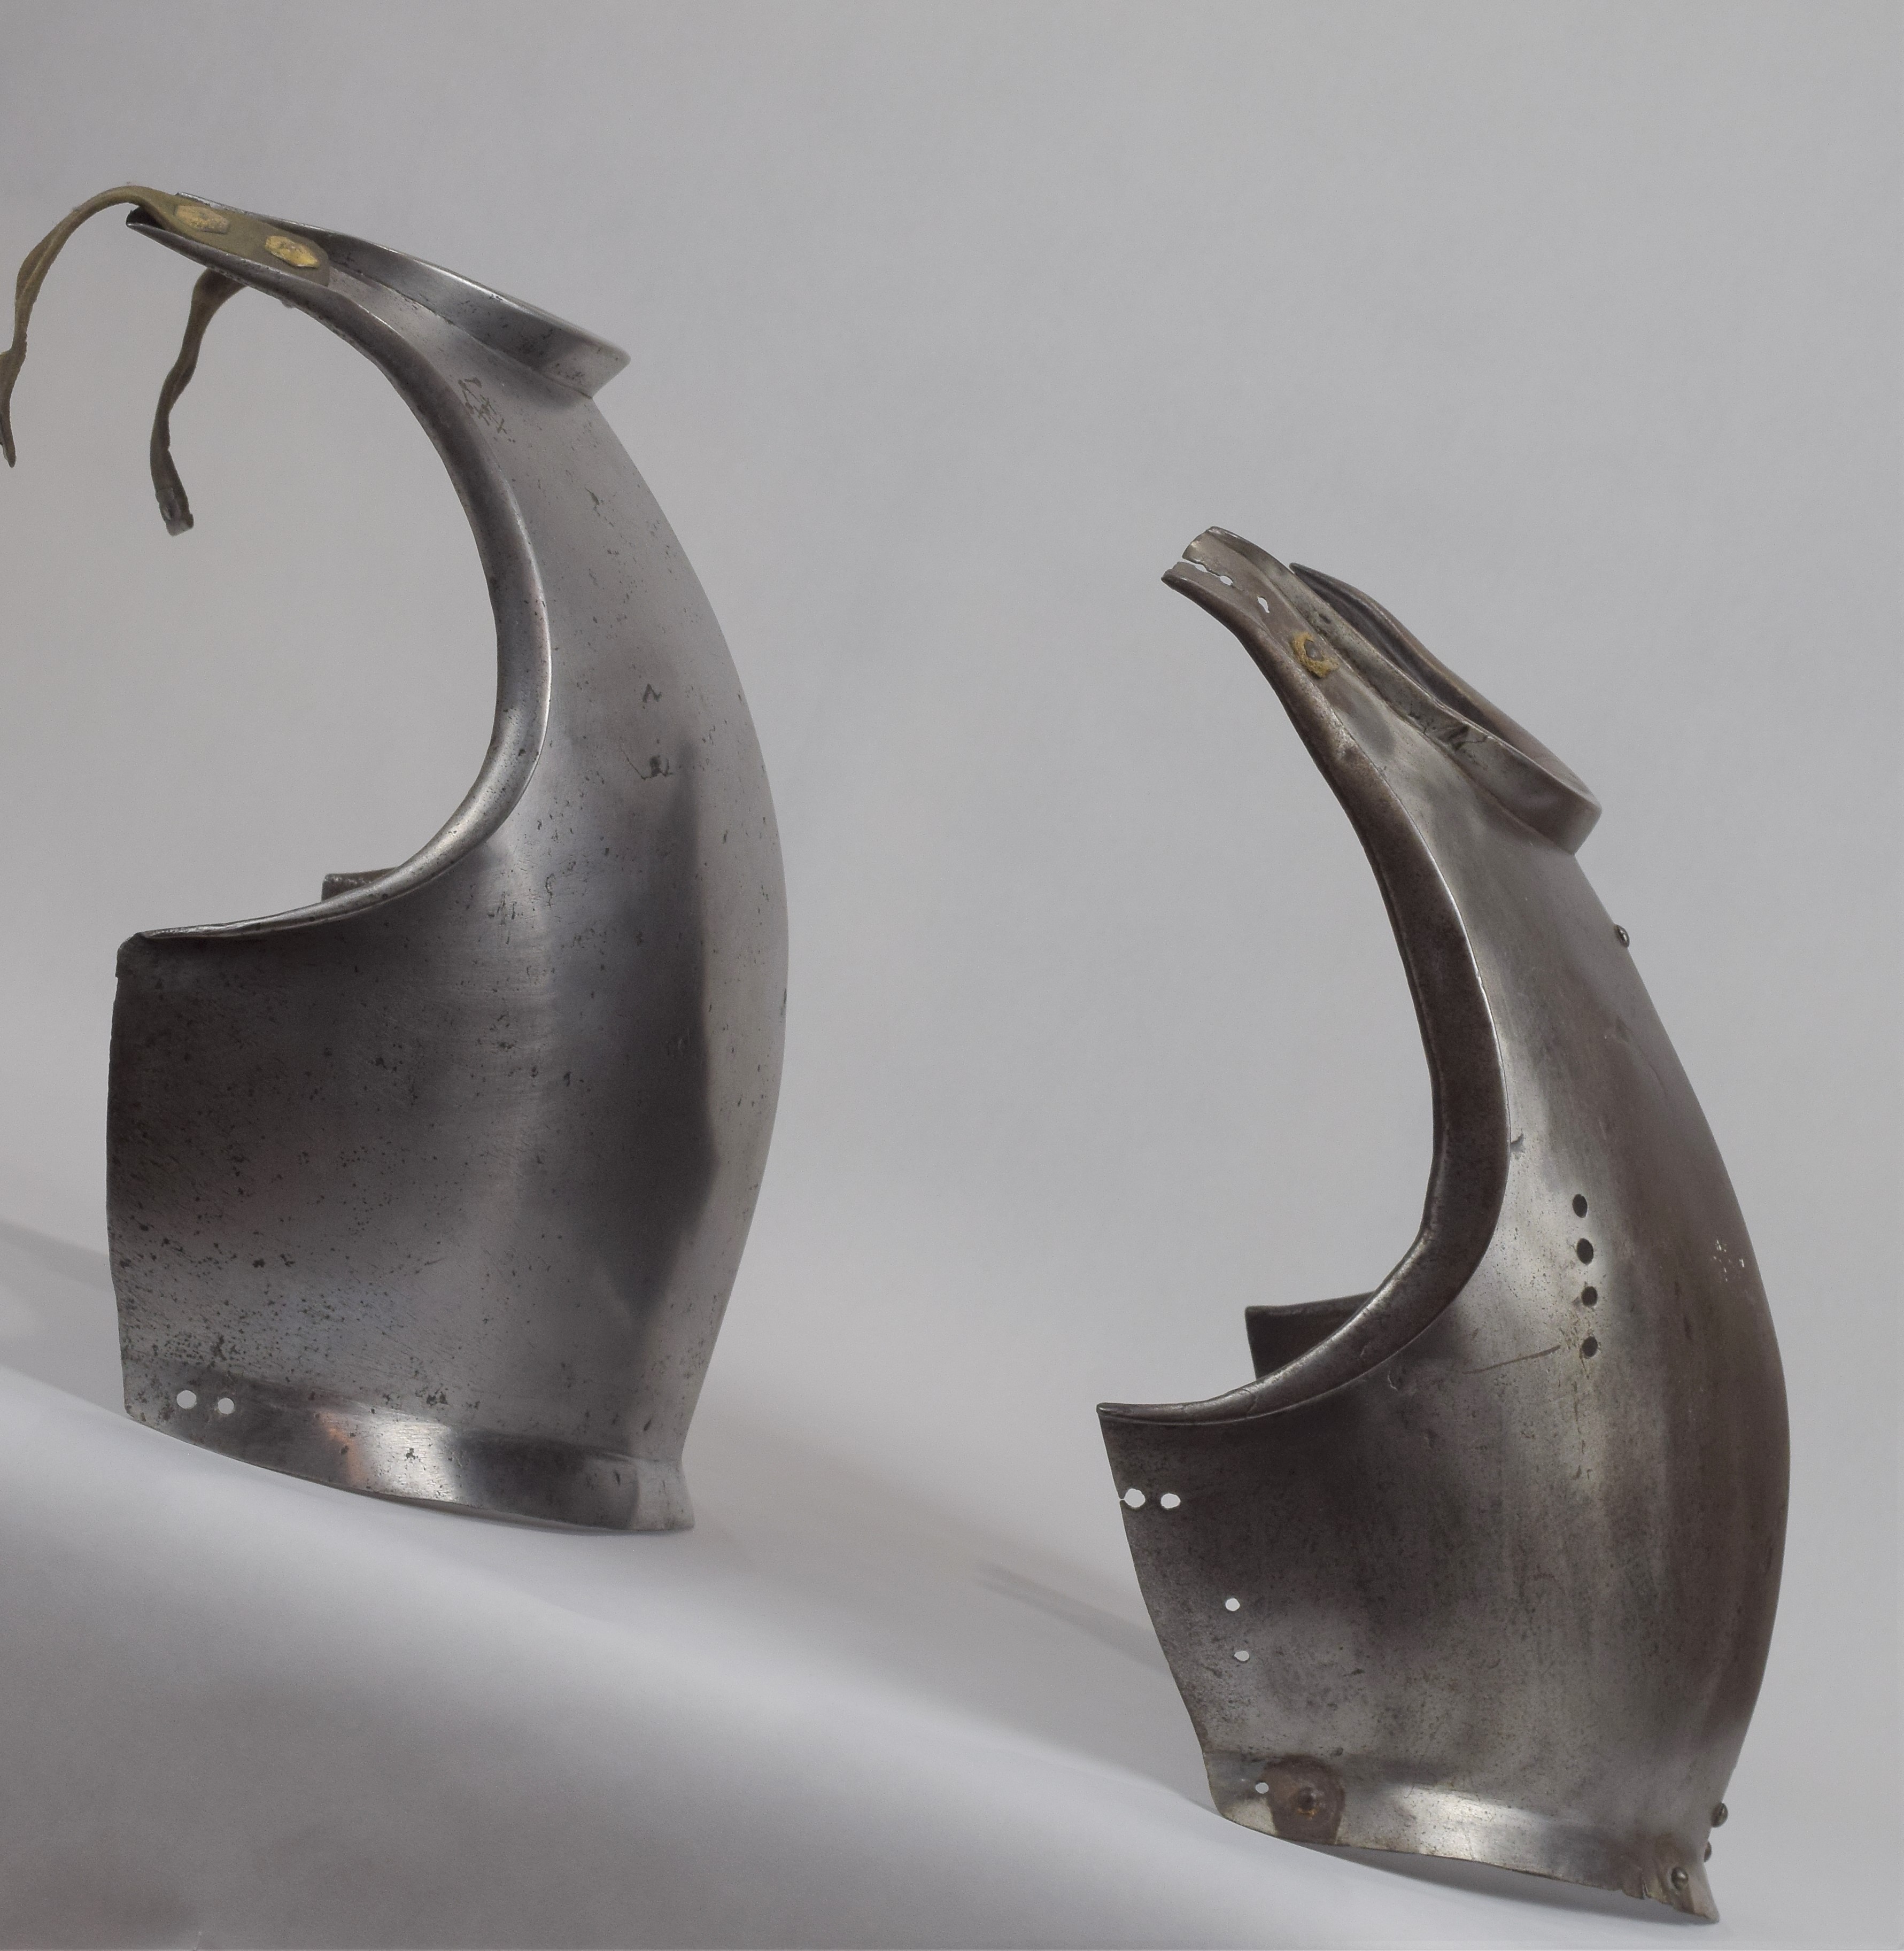 Italian or Flemish Breastplate - A-66-and-A-321-profile